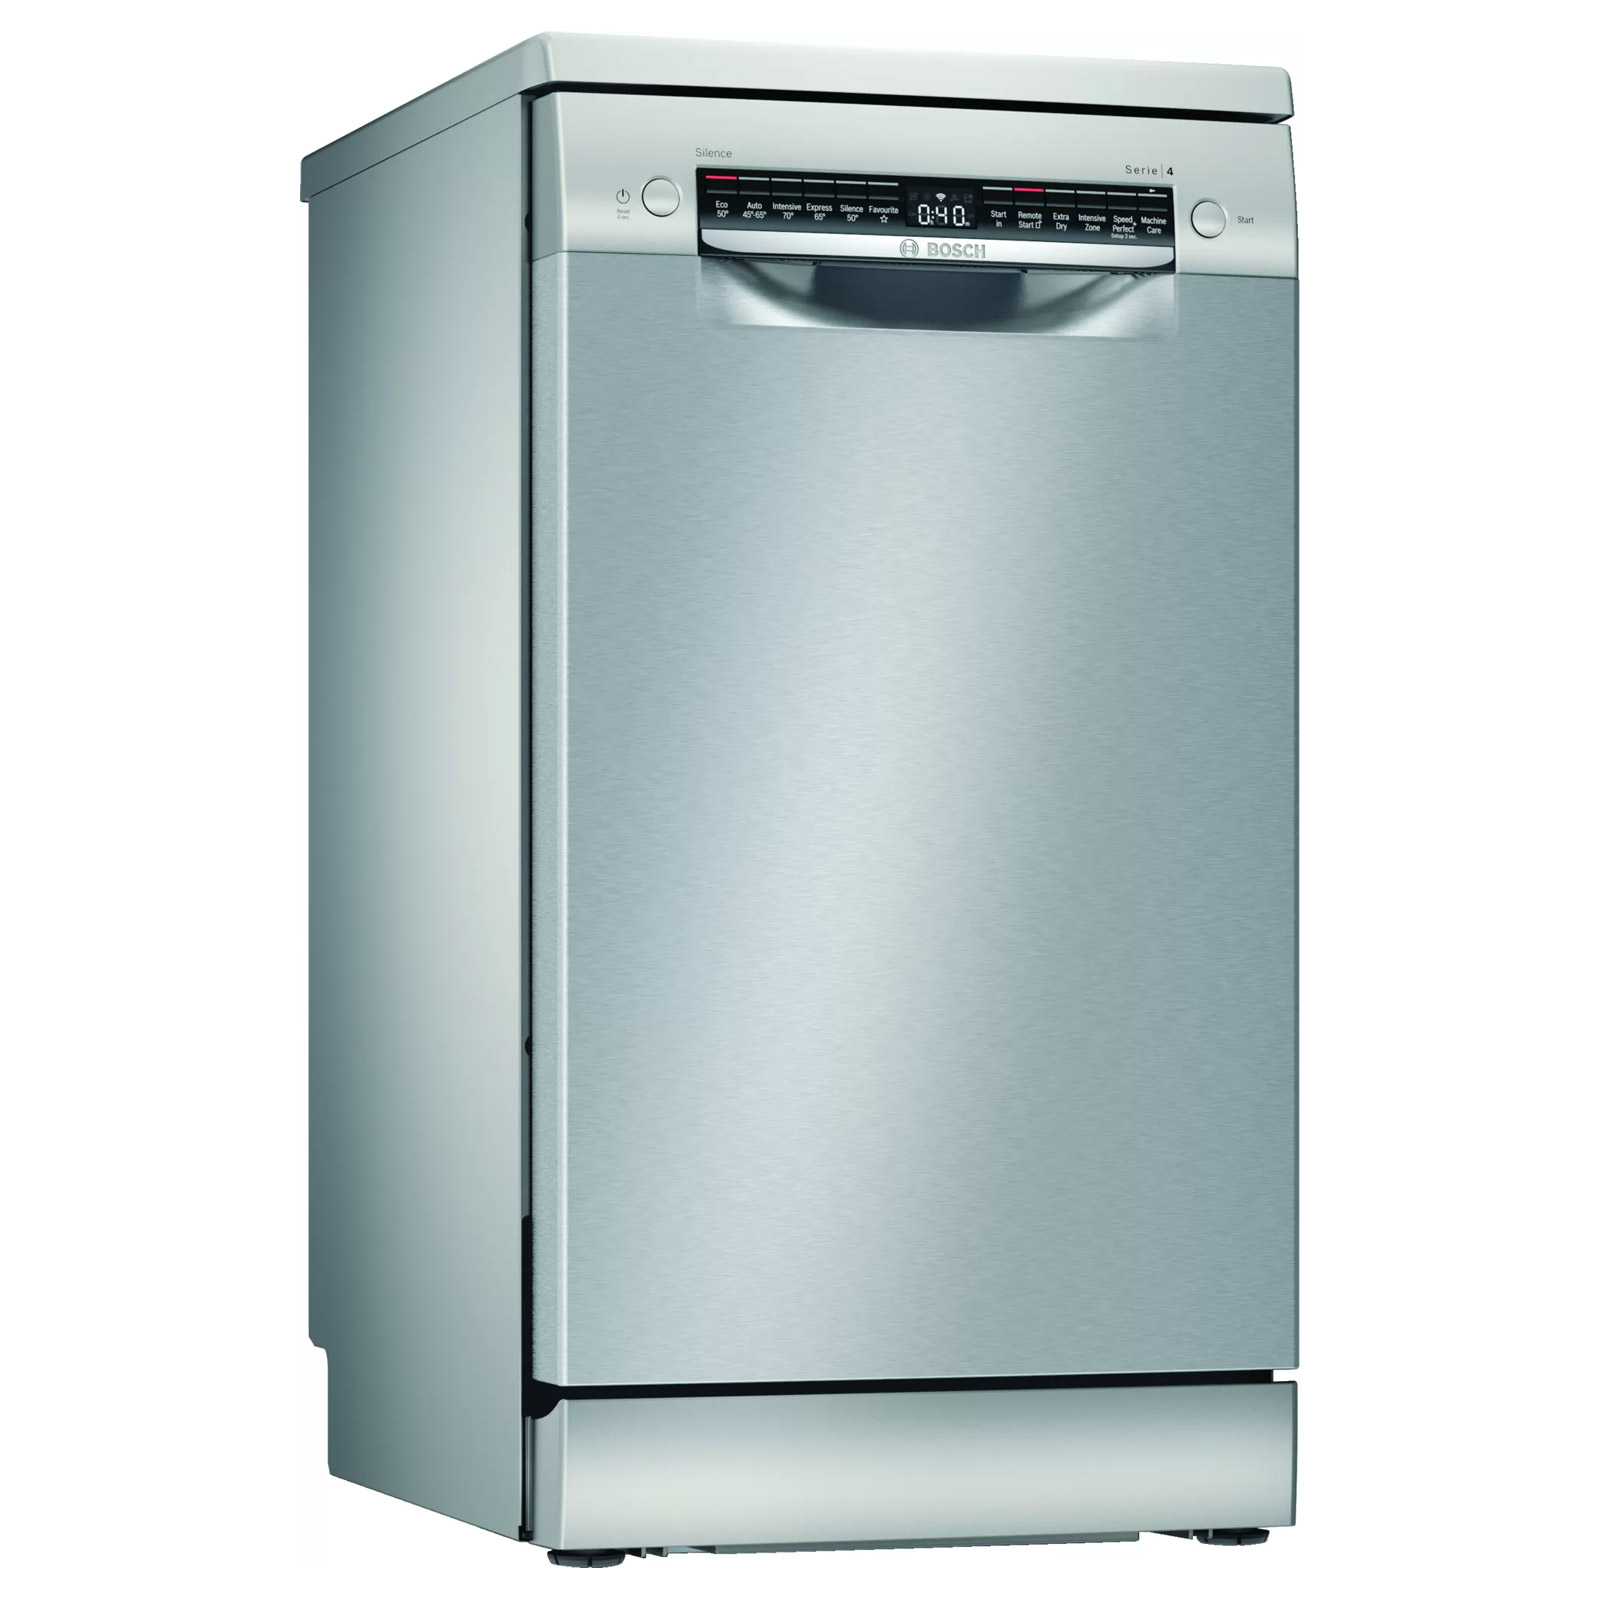 Image of Bosch SPS4HKI45G Series 4 45cm Dishwasher in Silver 9 Place Setting E